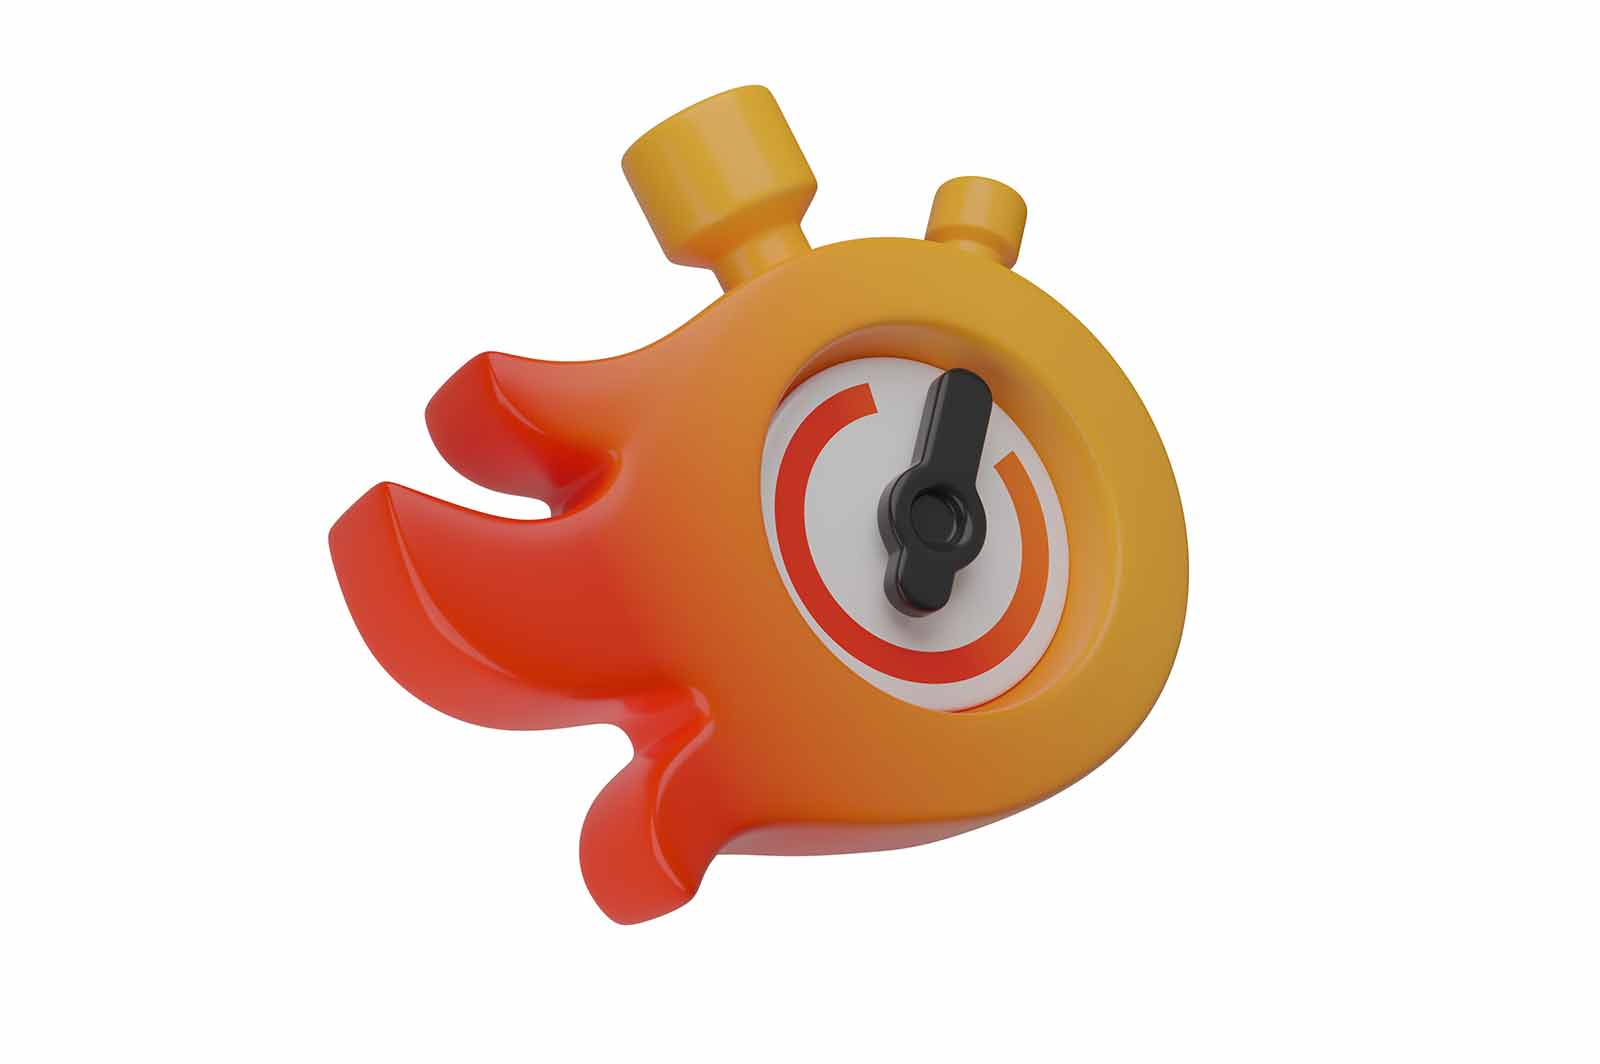 Stopwatch with flame is a 3d rendered illustration of a silver stopwatch with a red button and a black dial. The stopwatch has a body shaped like a flame, symbolizing speed, energy, and passion.